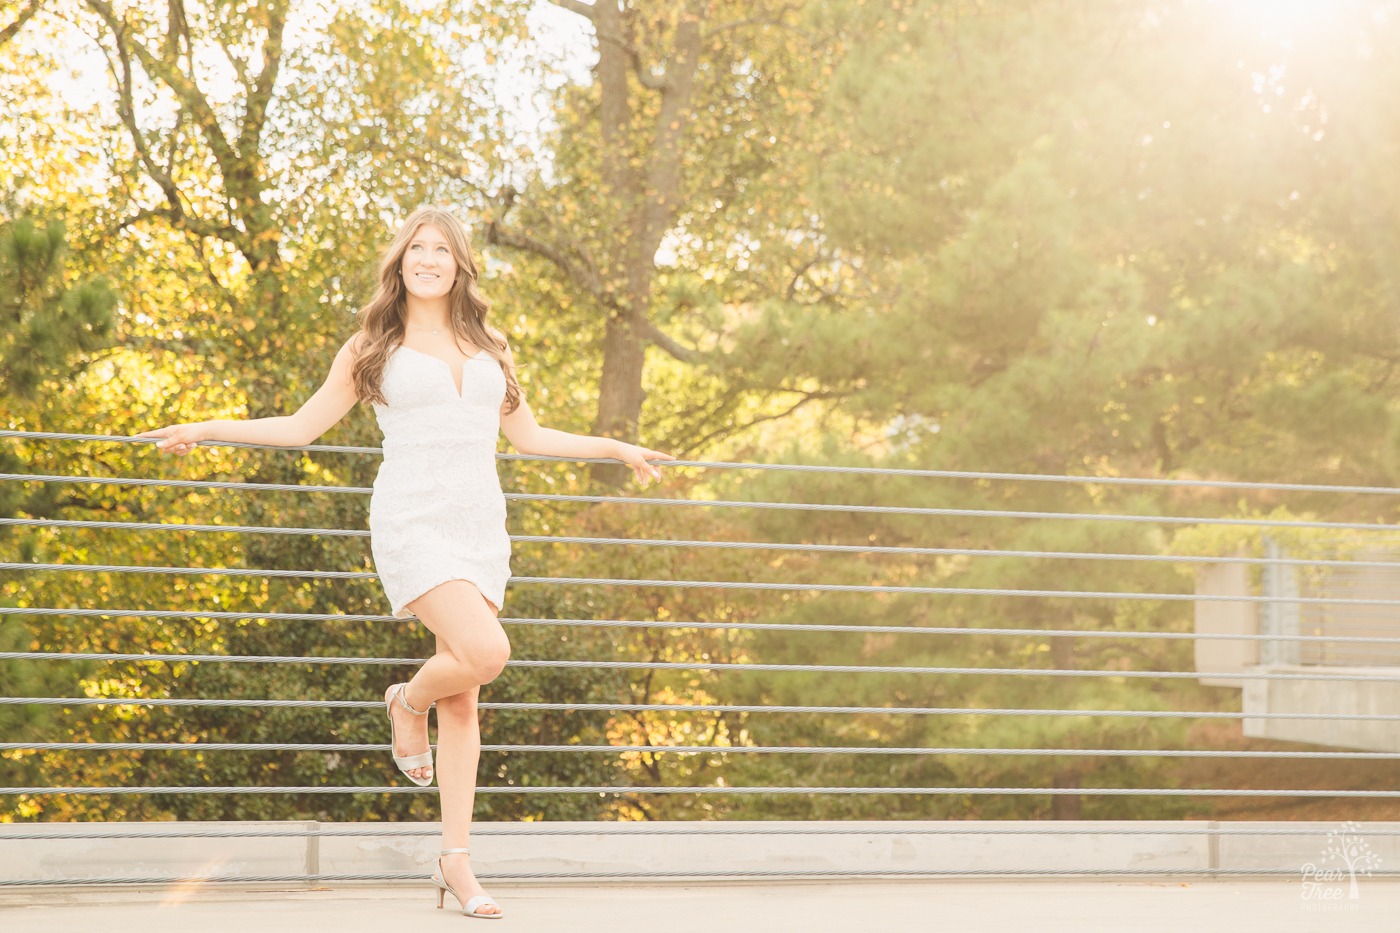 High school senior girl leaning against wire railings and smiling in a white lacy dress with the sun shining through trees behind her